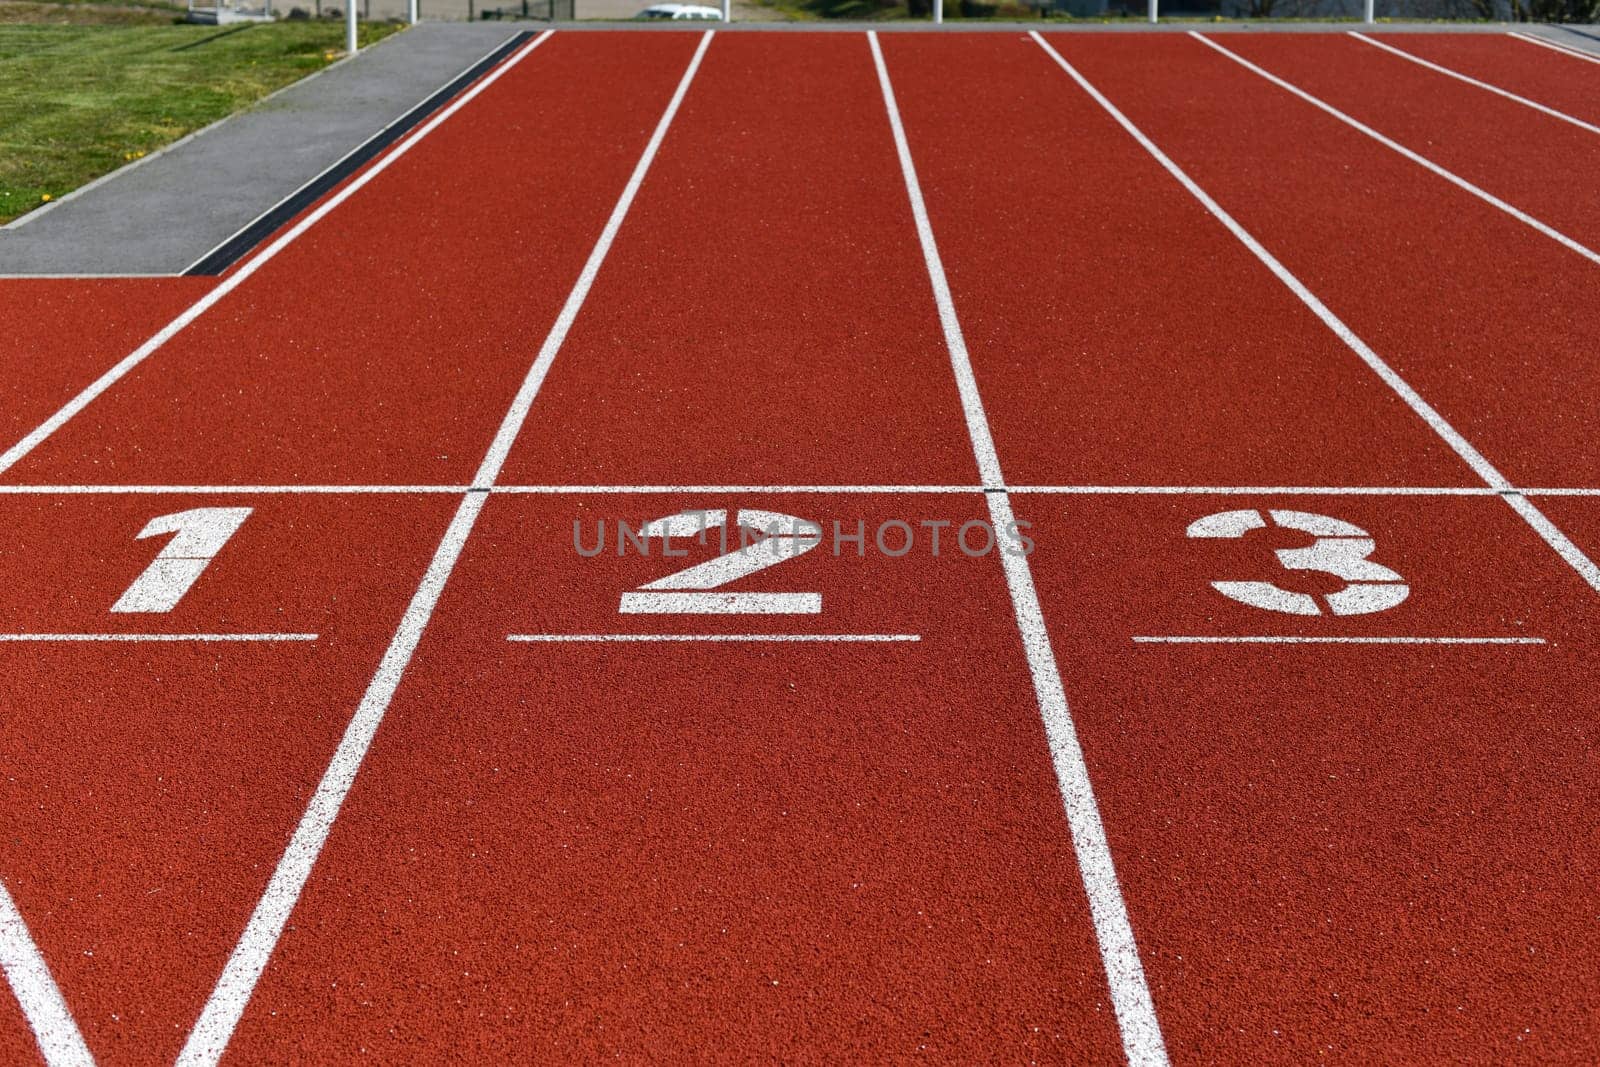 The red runway is numbered in a stadium